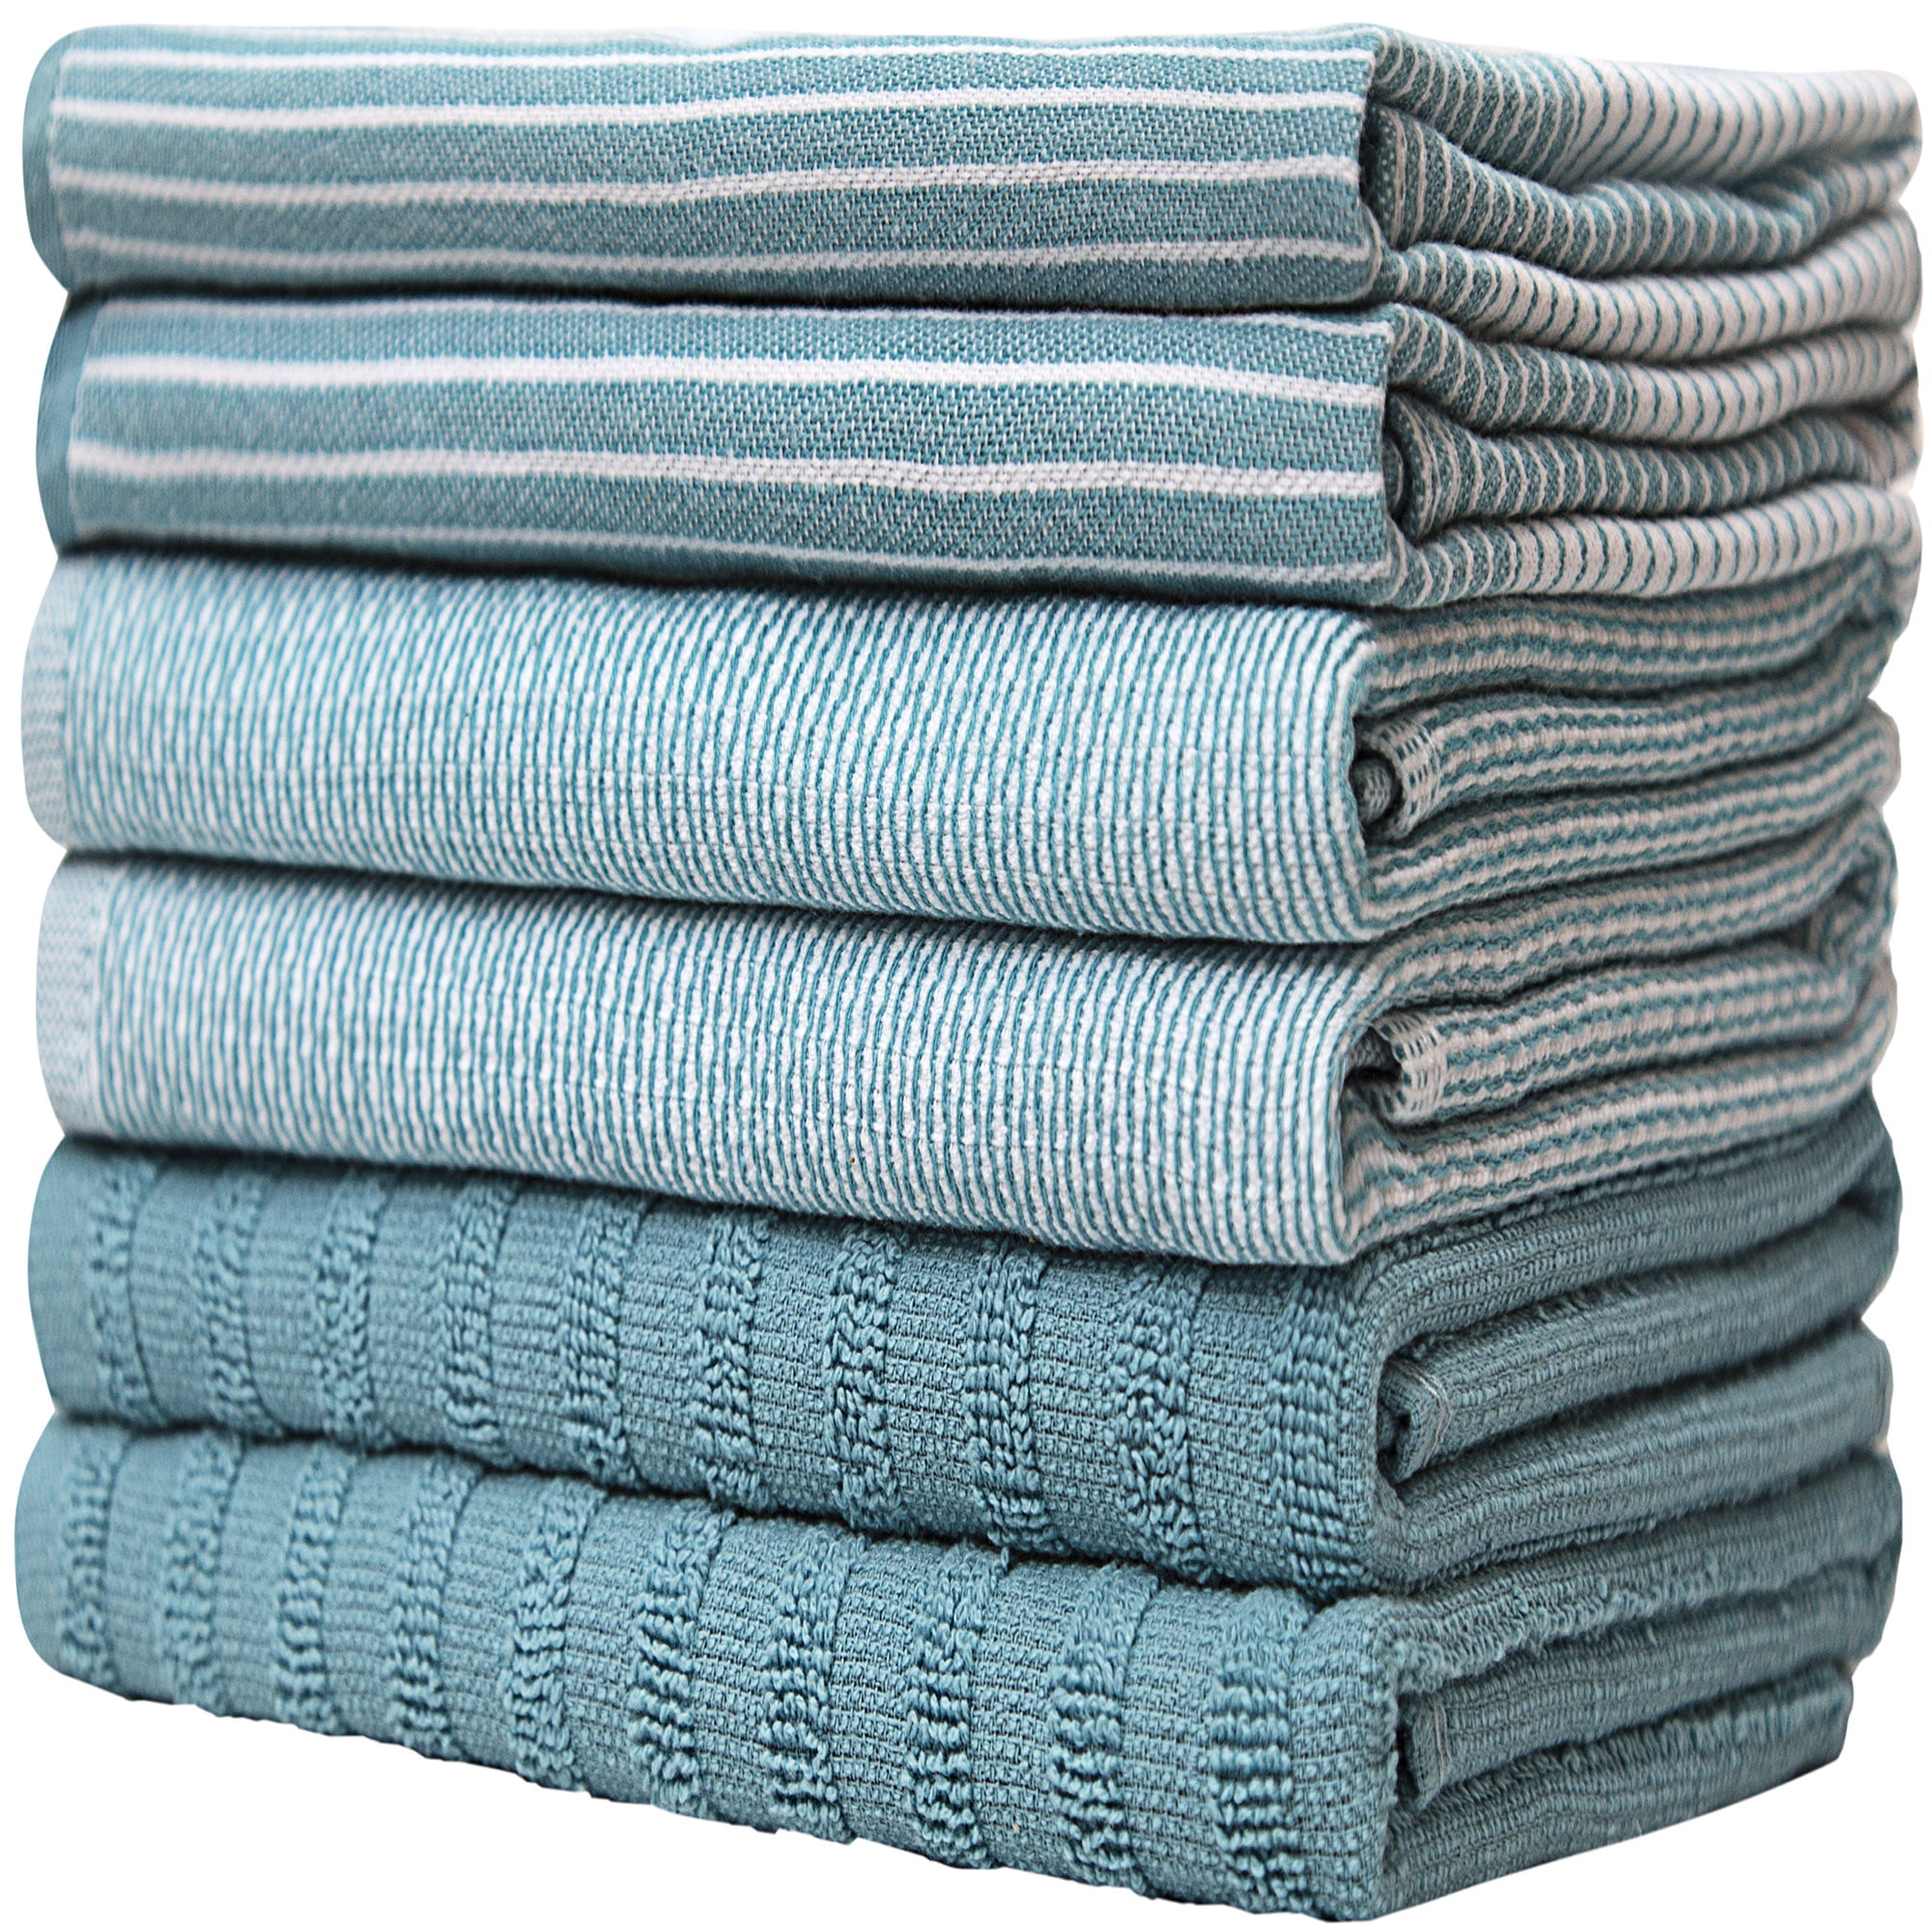 Honeycomb Stripe Kitchen Towel 18x28inch Teal/Mercury,100% Cotton, Quick  Dry, Tea Towels, Bar Towels, Highly Absorbent,Cleaning Towels, Kitchen Tea